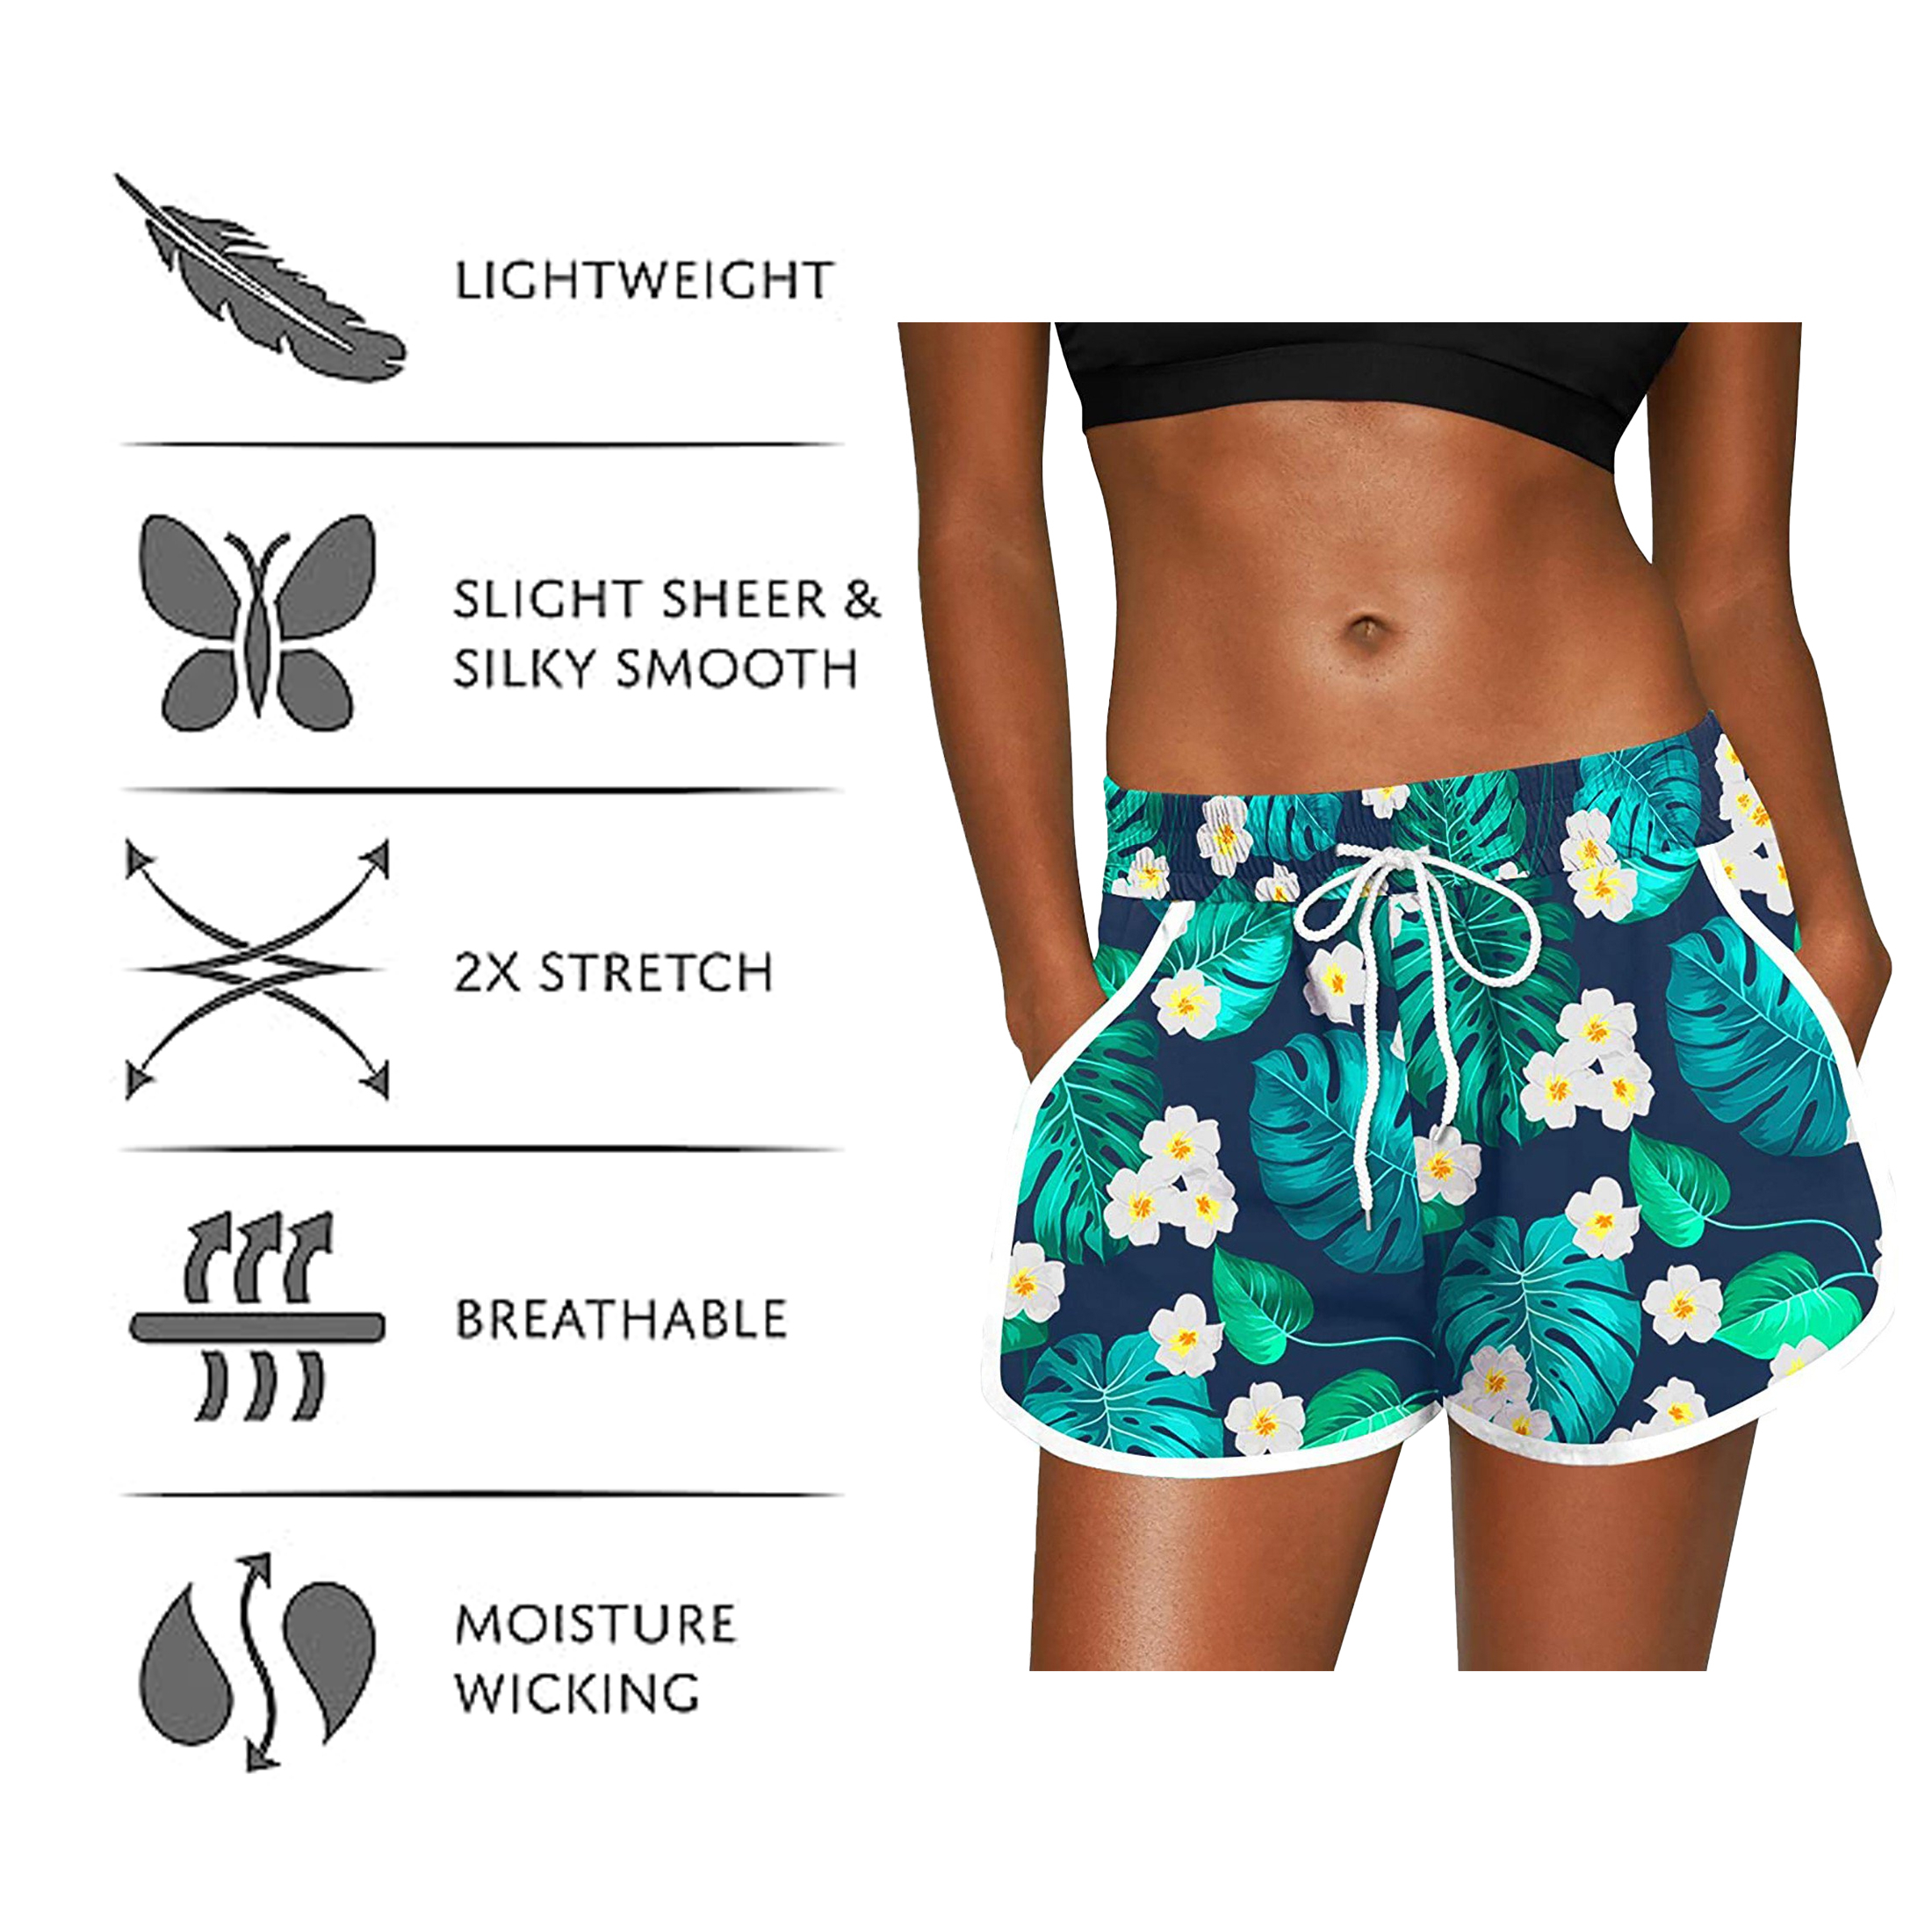 2-Pack Women's Floral Printed Shorts Elastic Waist Drawstring Summer Lounge Wear Pants Casual Dolphin Shorts With Pockets Quick Dry - S